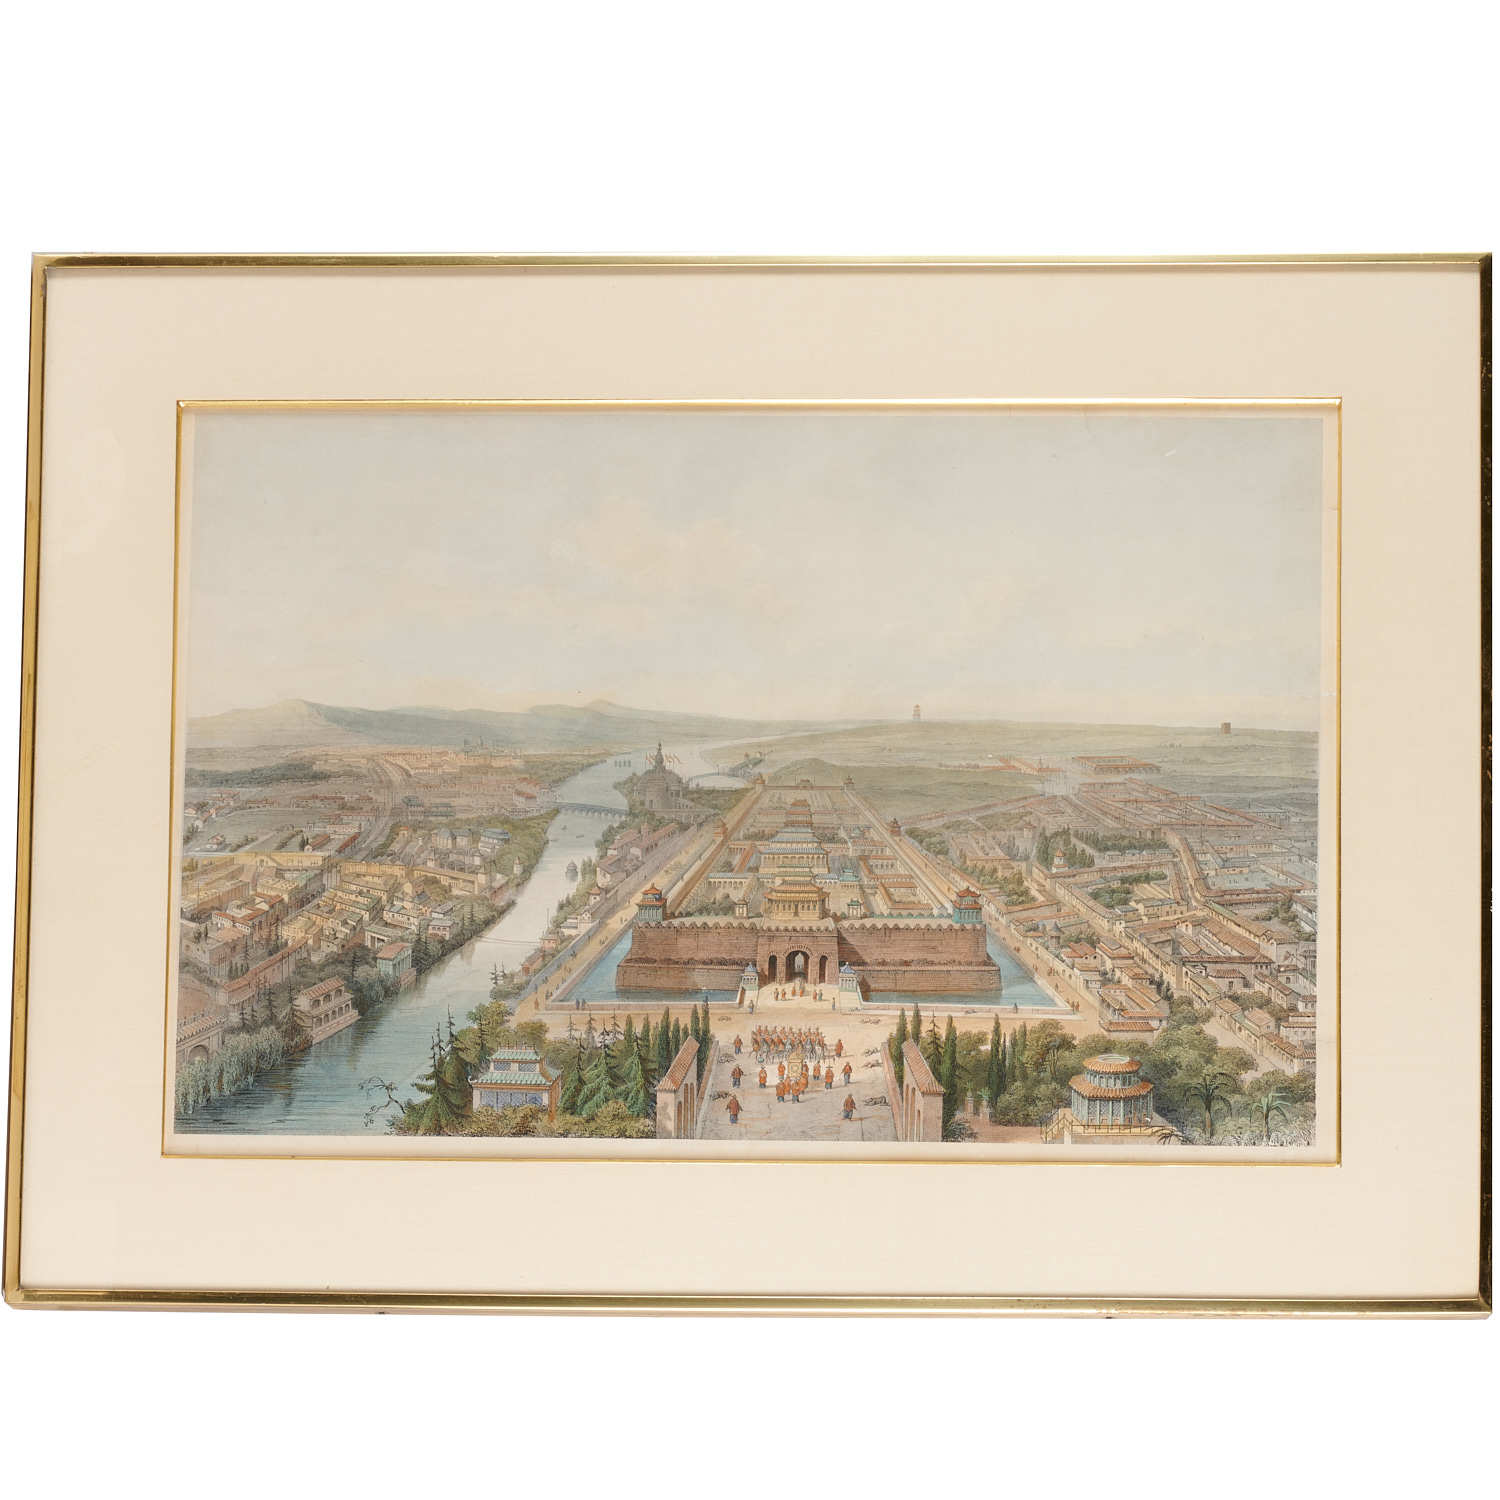 HAND COLORED LITHOGRAPH BEIJING 362272